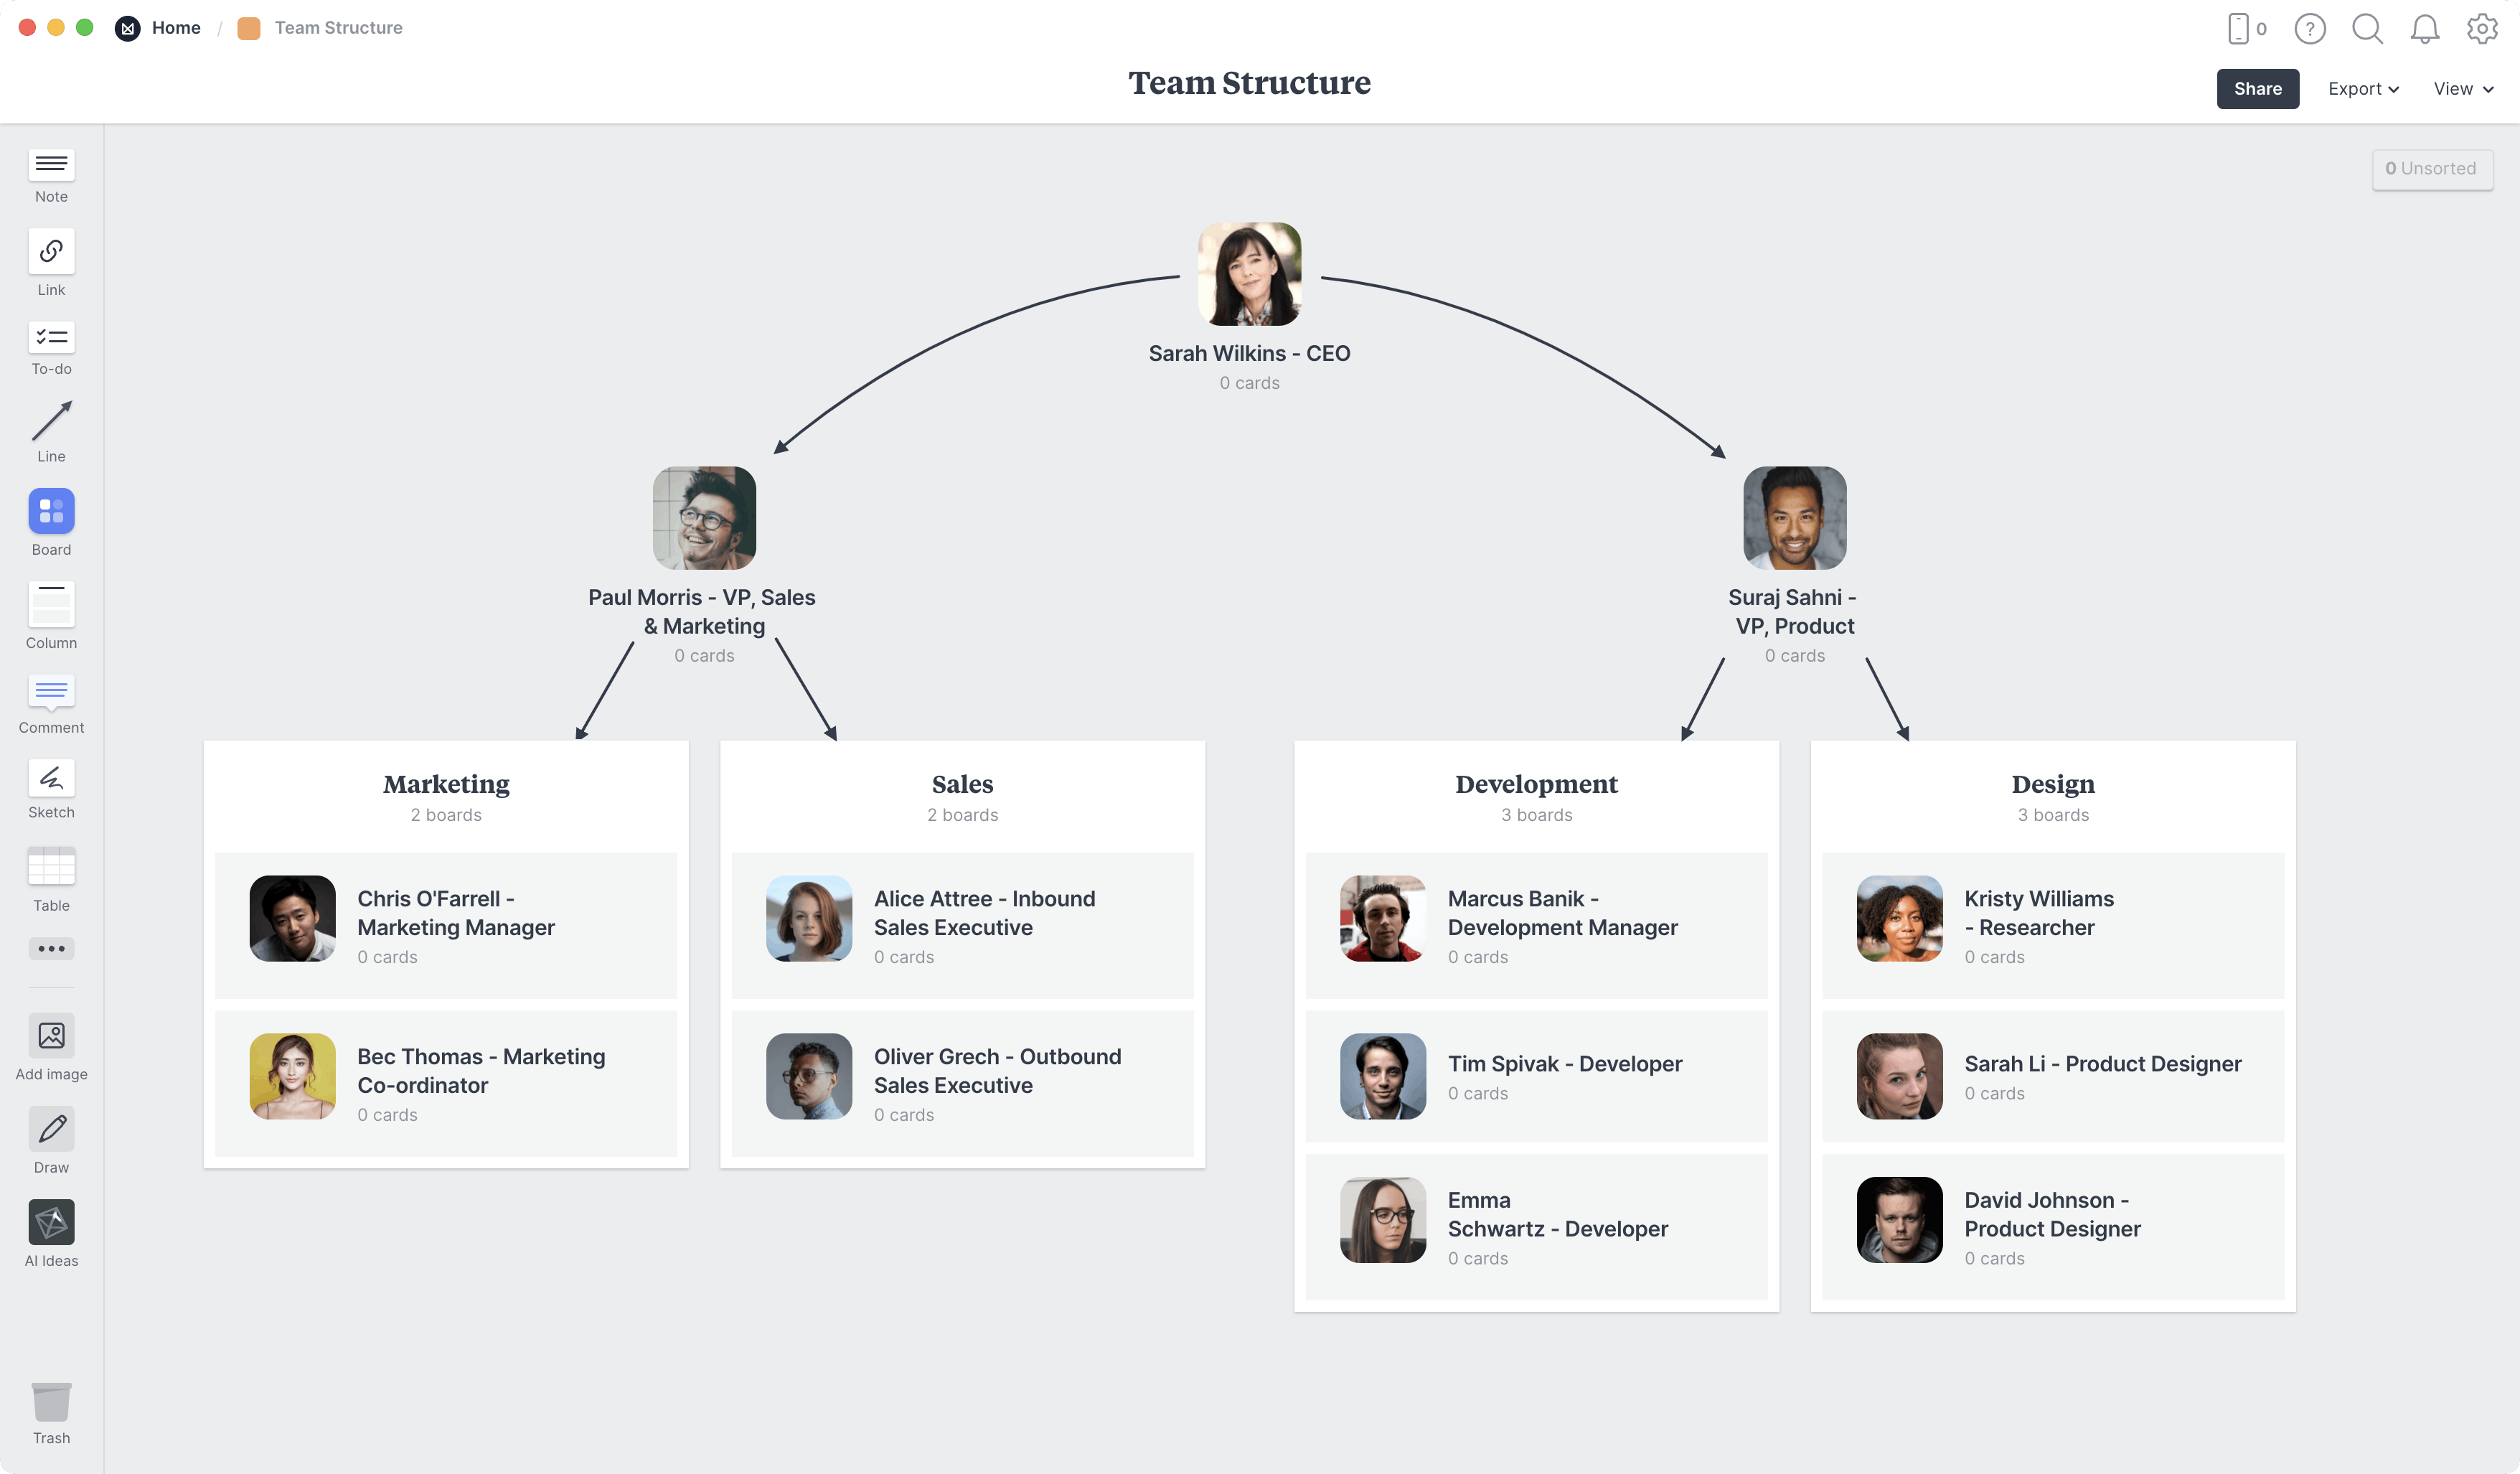 Team Structure Template, within the Milanote app